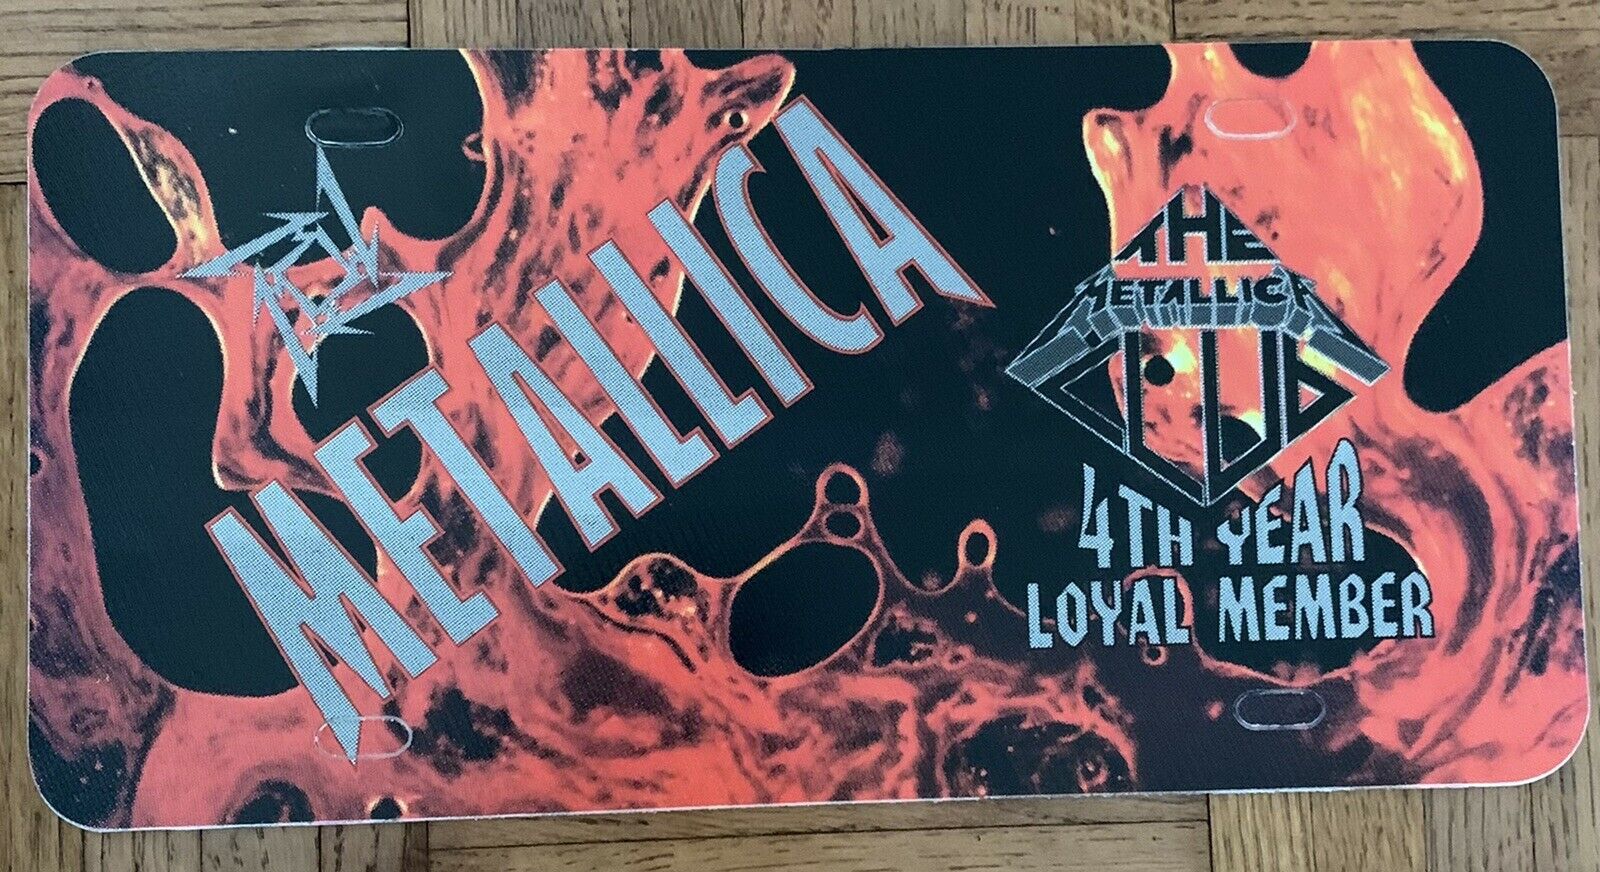 Metallica Club 4th Year Loyal Member License Plate “load Graphics New Never Used